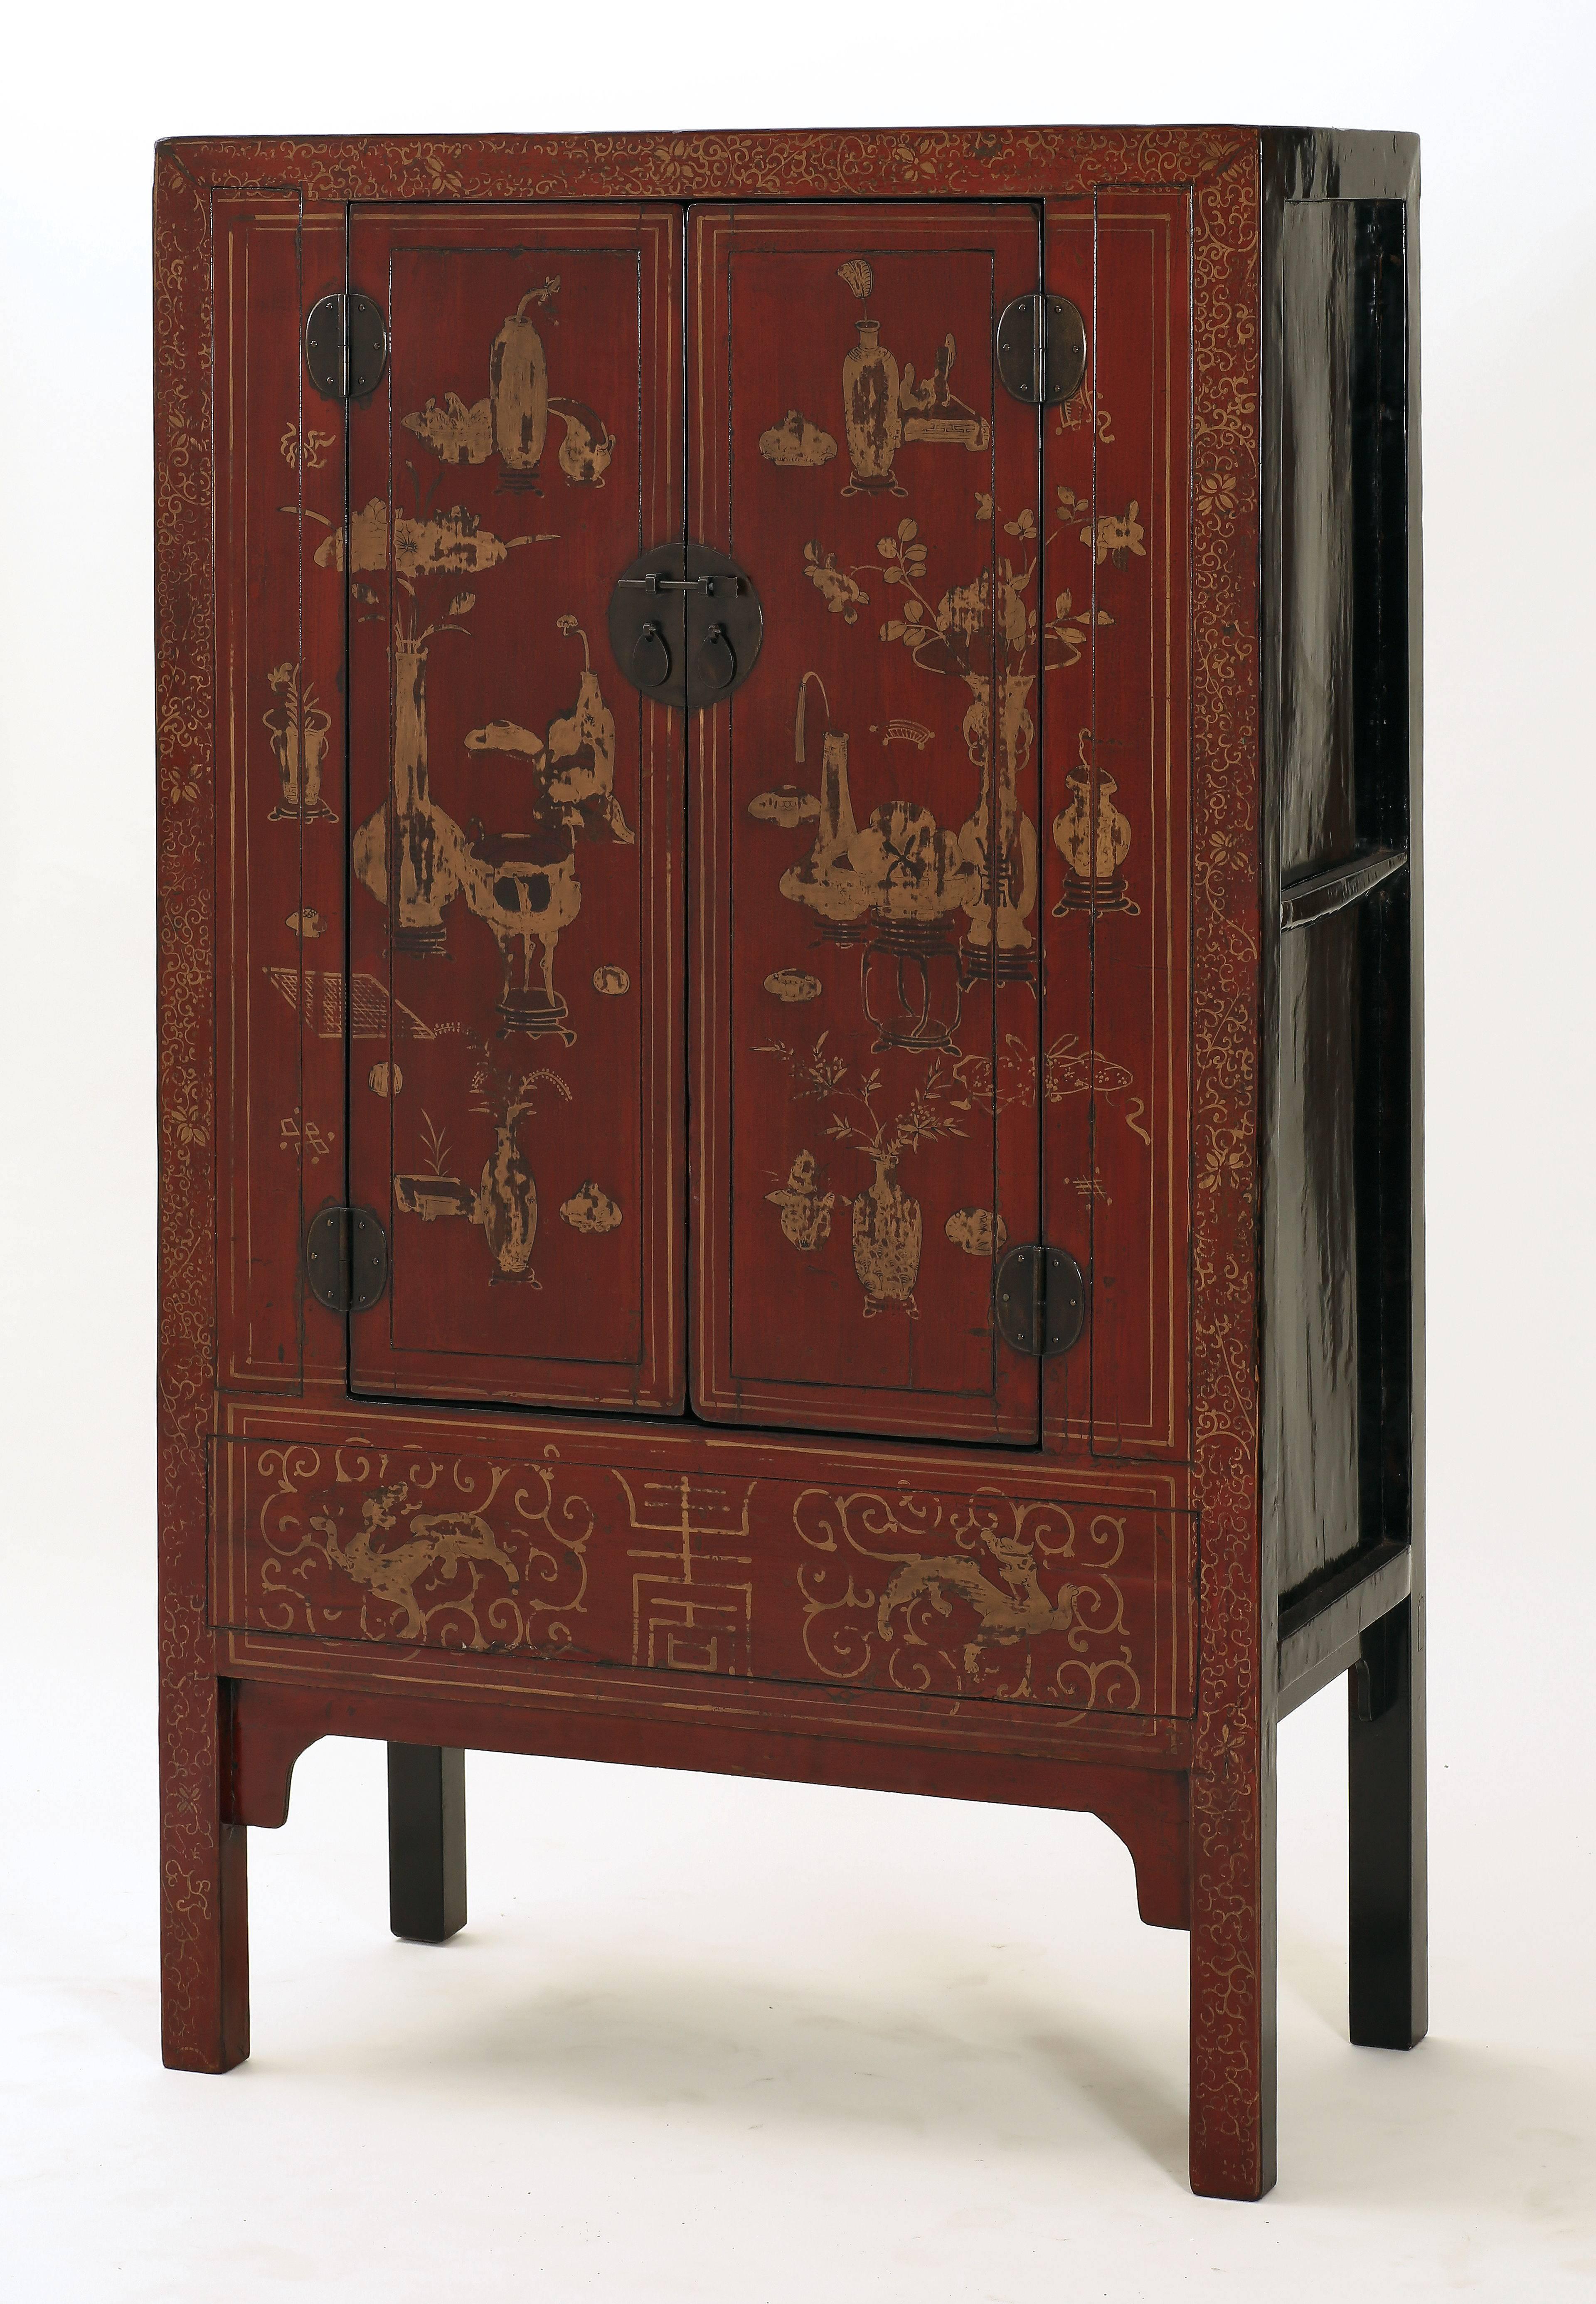 Hand-Crafted Antique Red Lacquer Gilt Painted Chinese Compound Cabinet, Scholastic Art